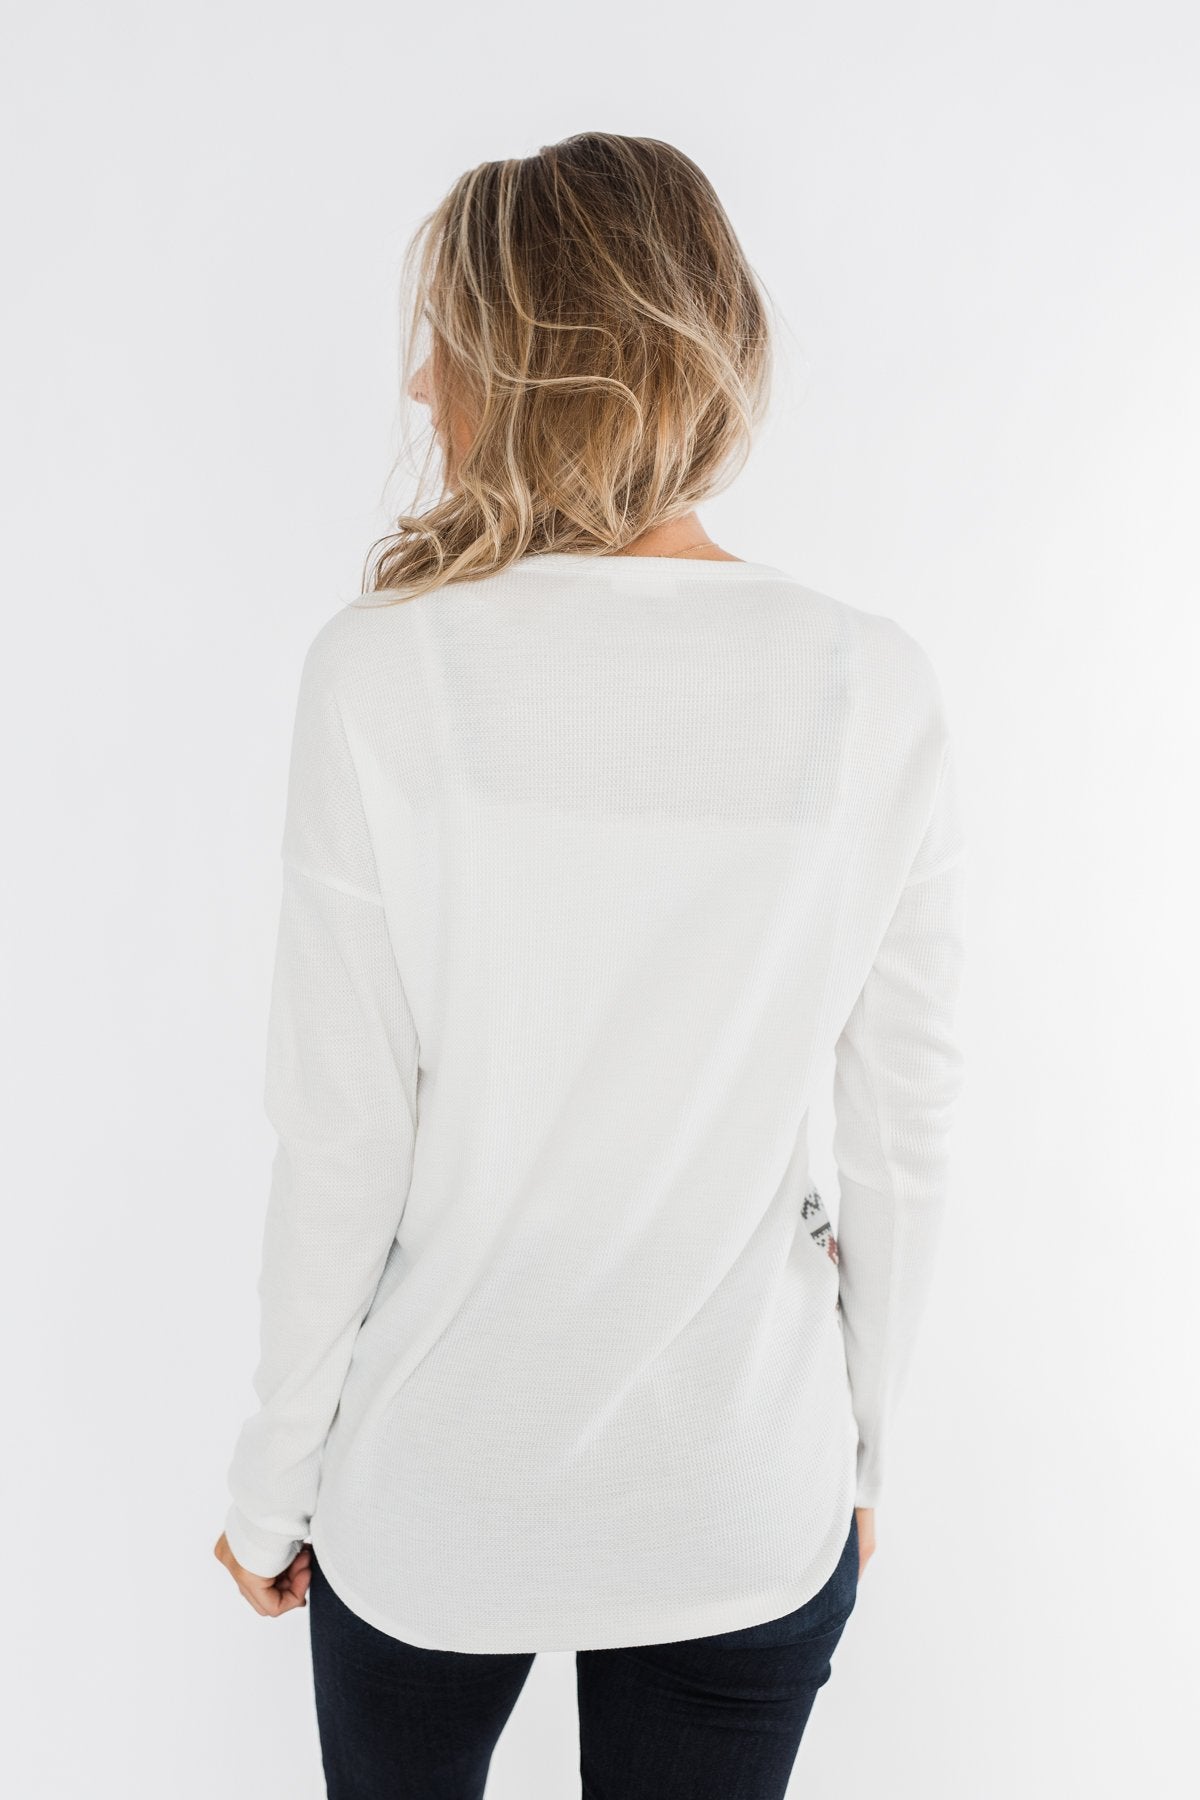 Winter Wonderland Thermal Top- Ivory – The Pulse Boutique